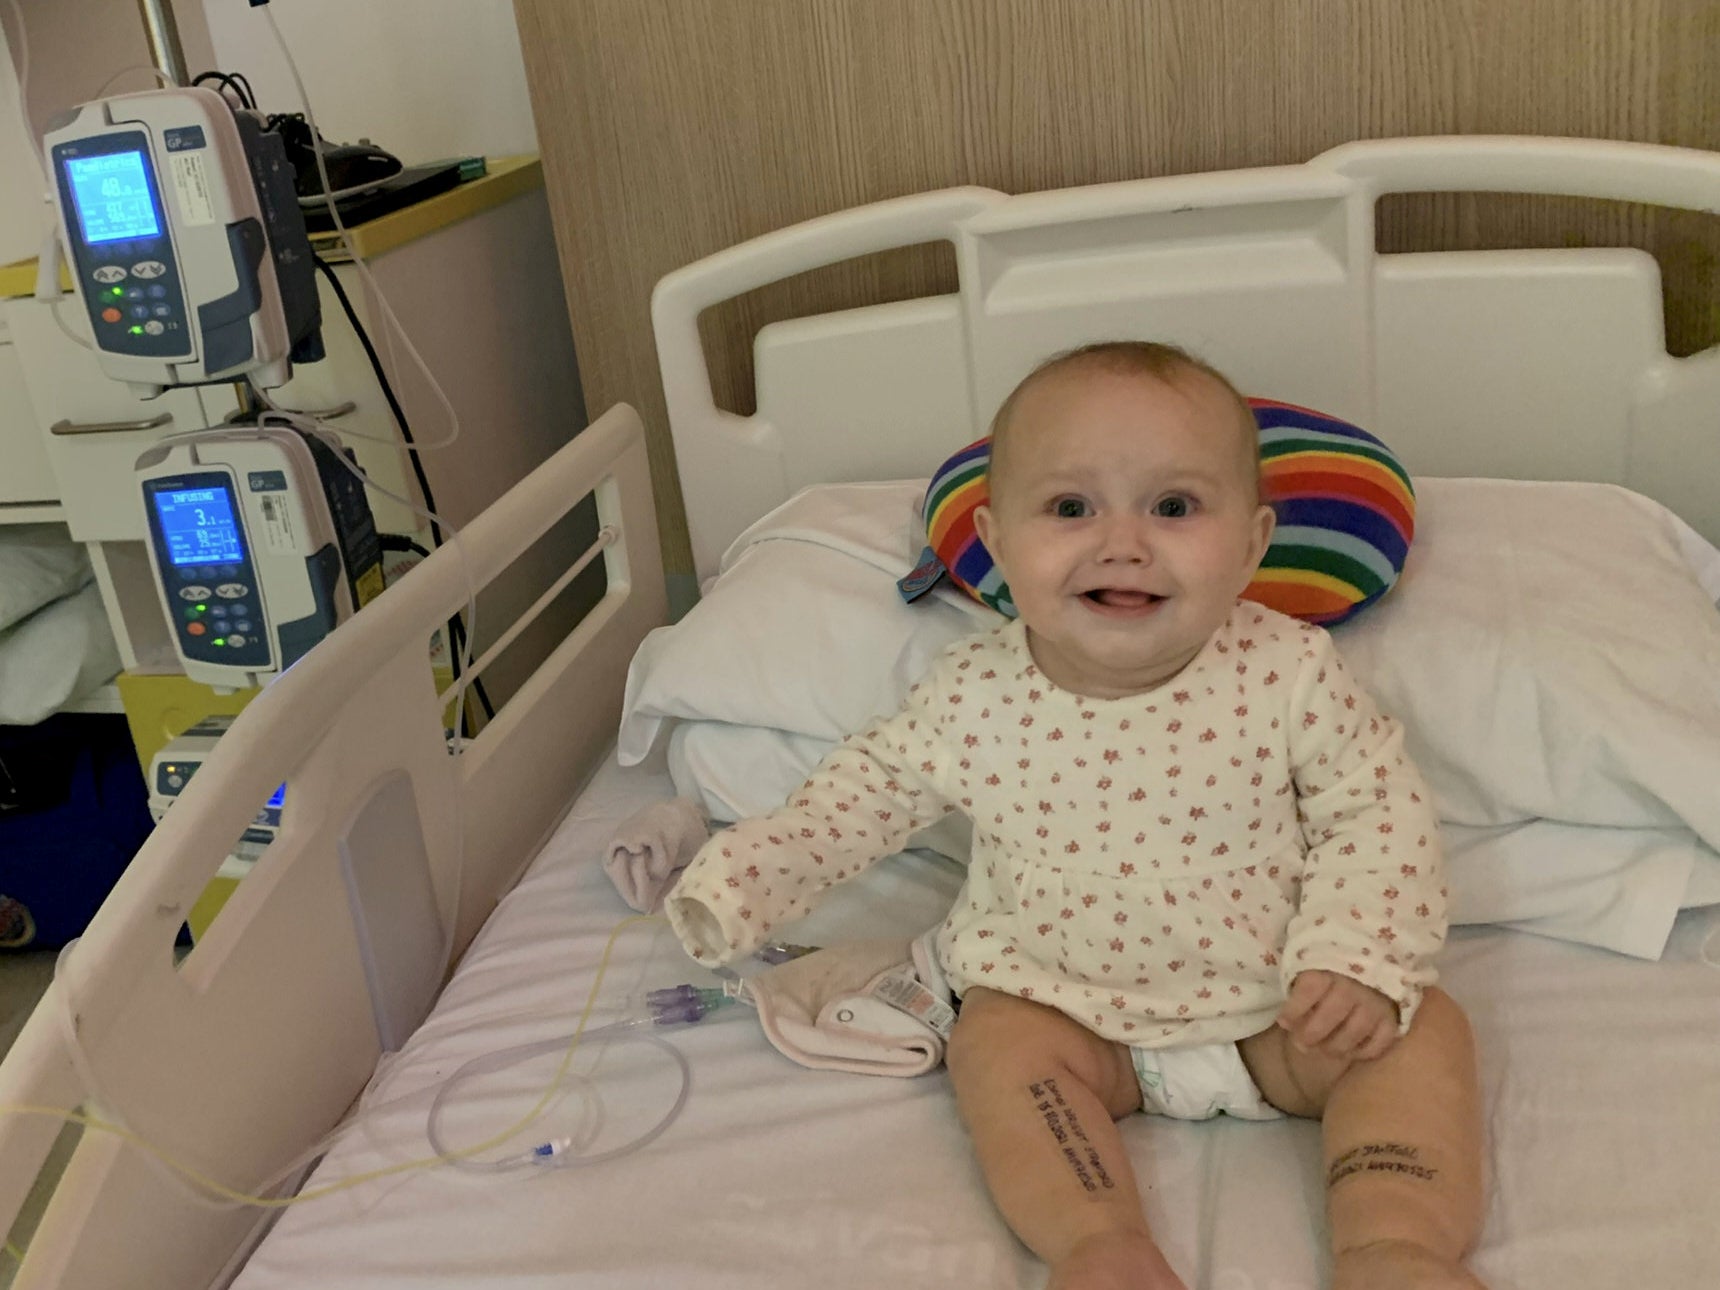 Baby Esmai is currently undergoing chemotherapy for her brain tumour